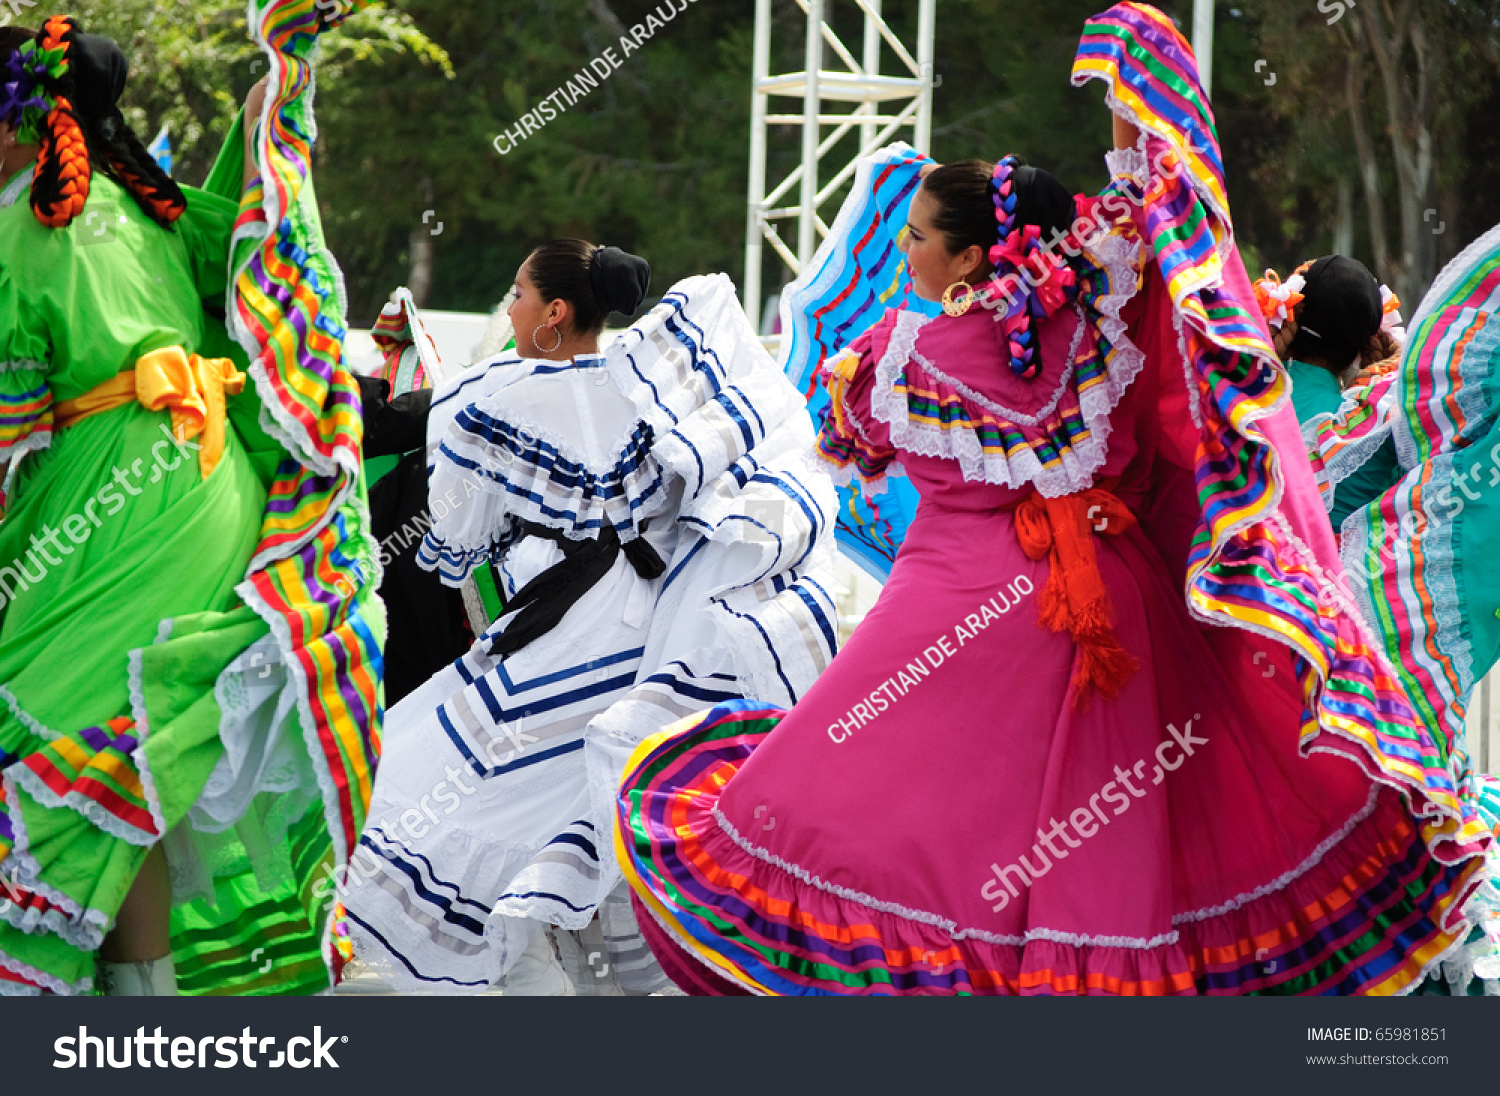 Costa Mesa, Ca - July 24: Unidentified Mexican Dancers Perform In ...